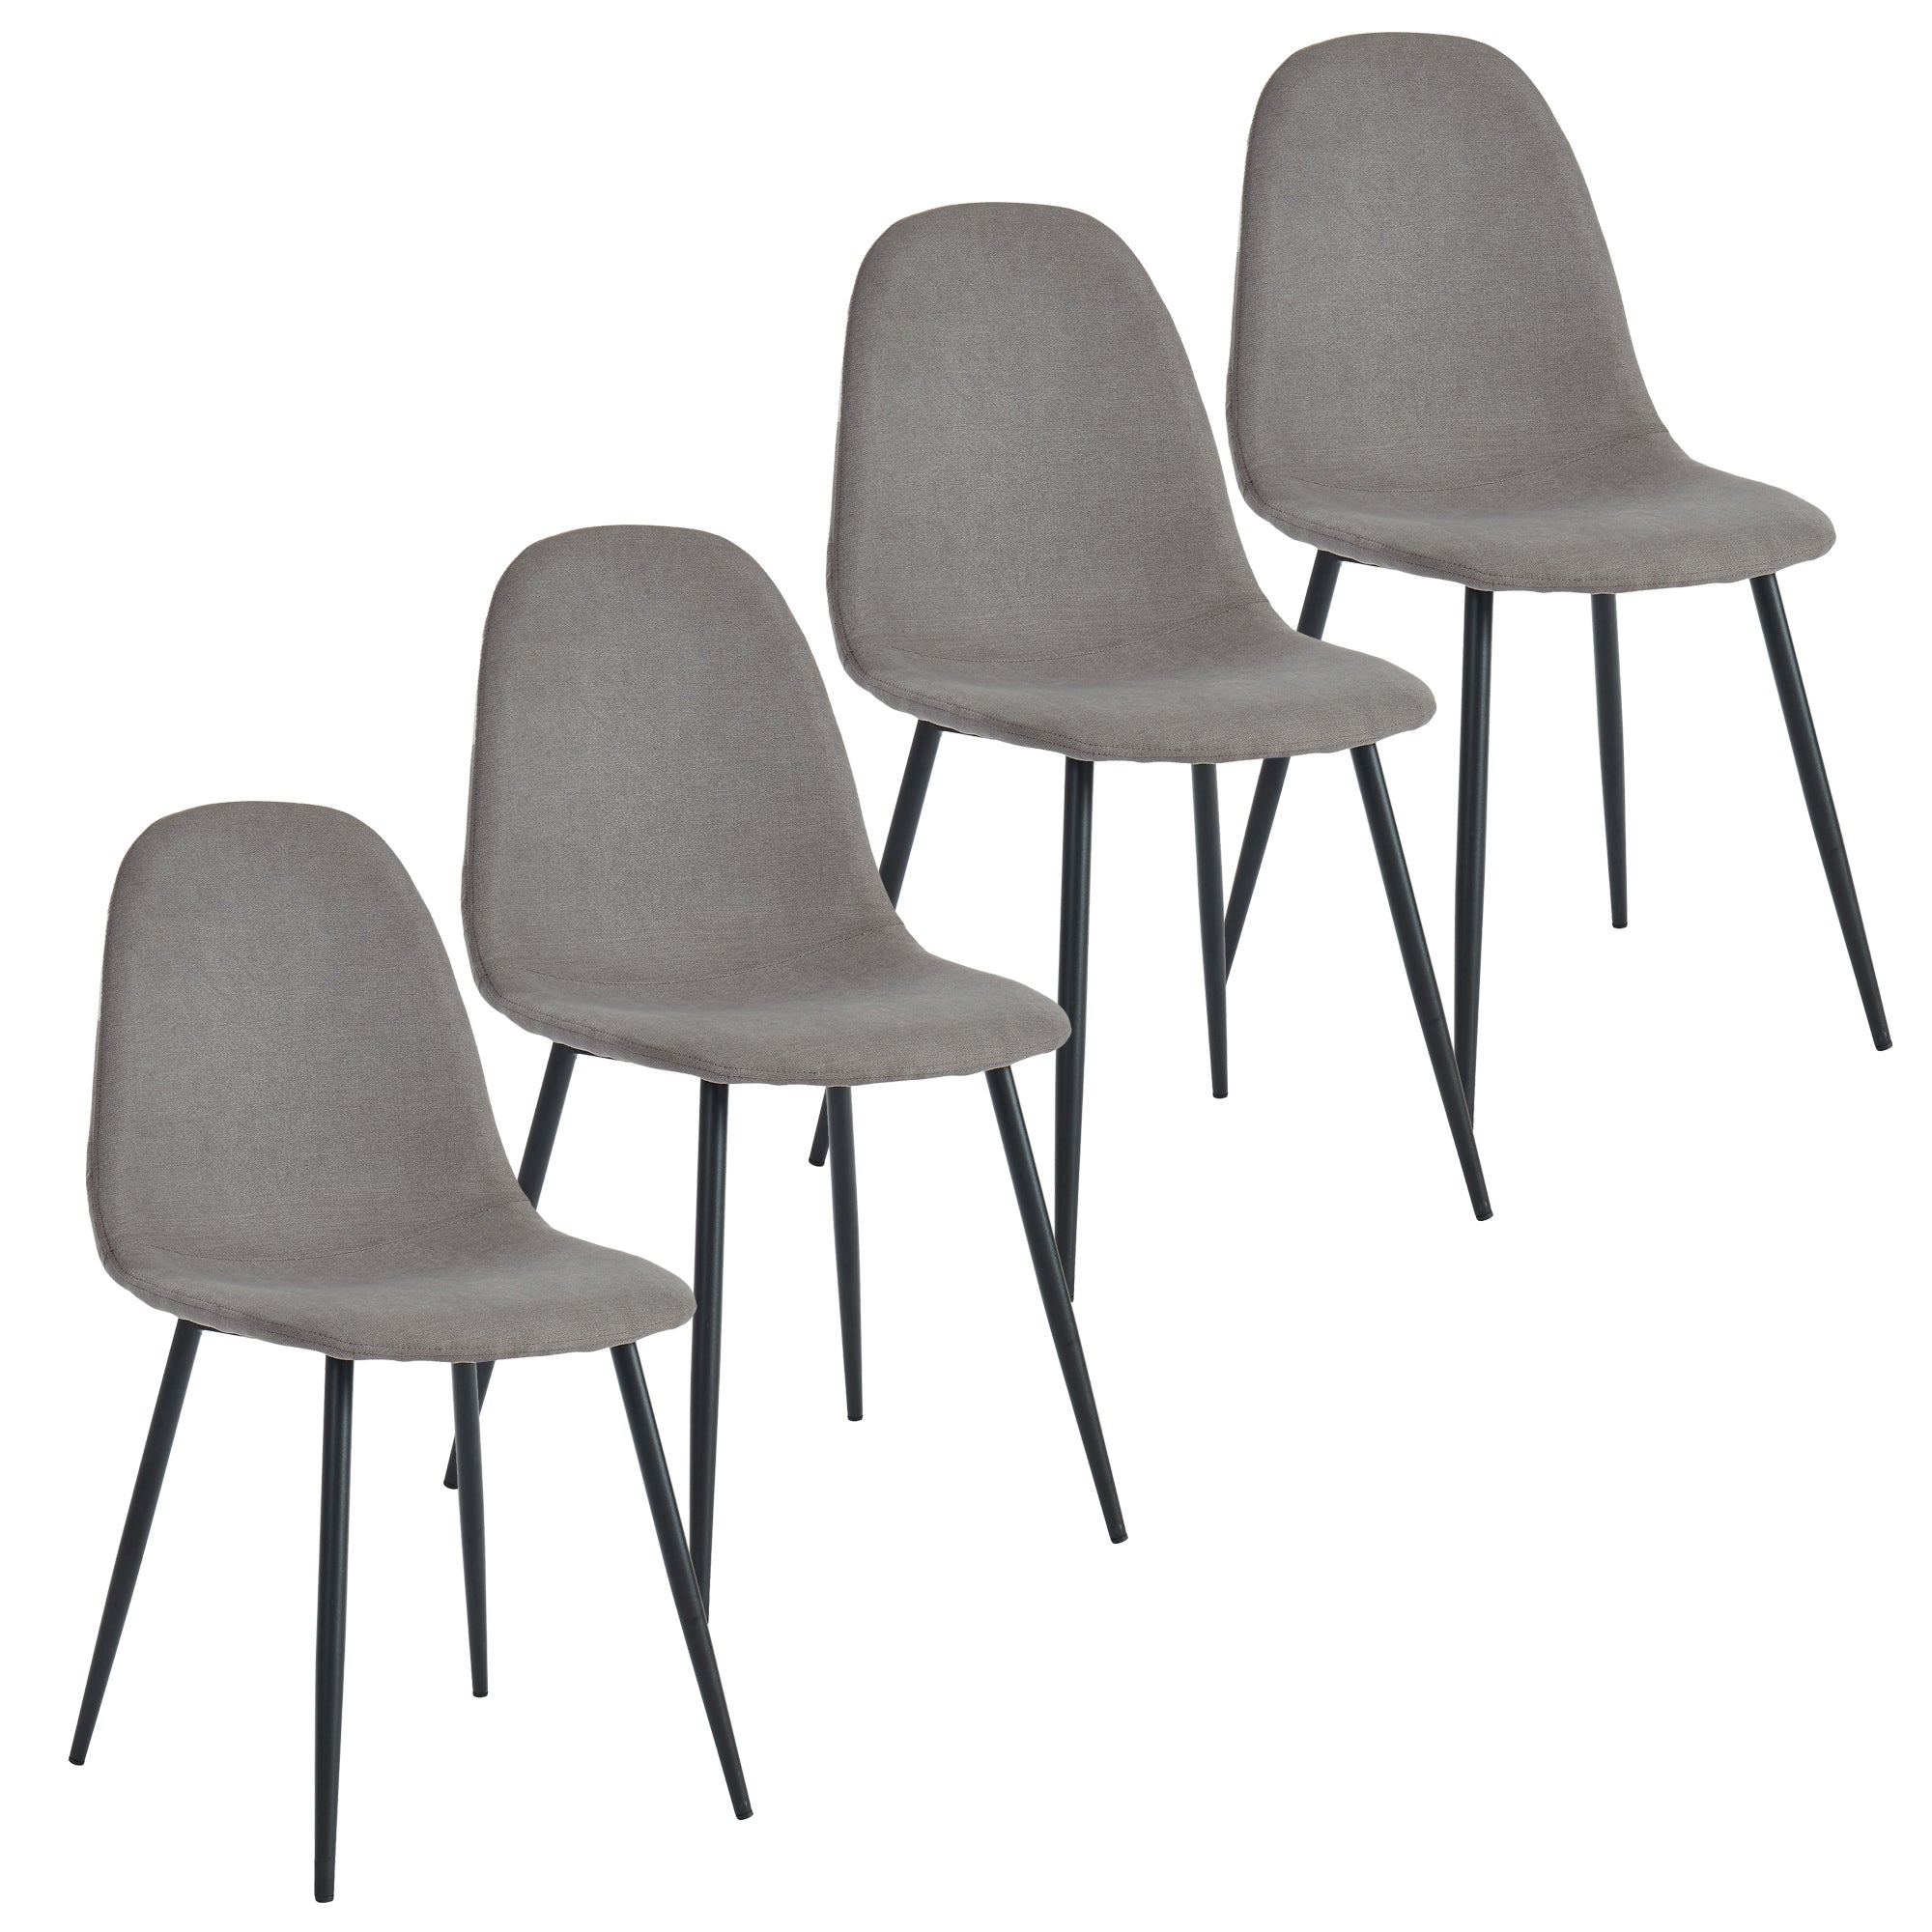 OLLY-SIDE CHAIR-GREY   4 Pcs